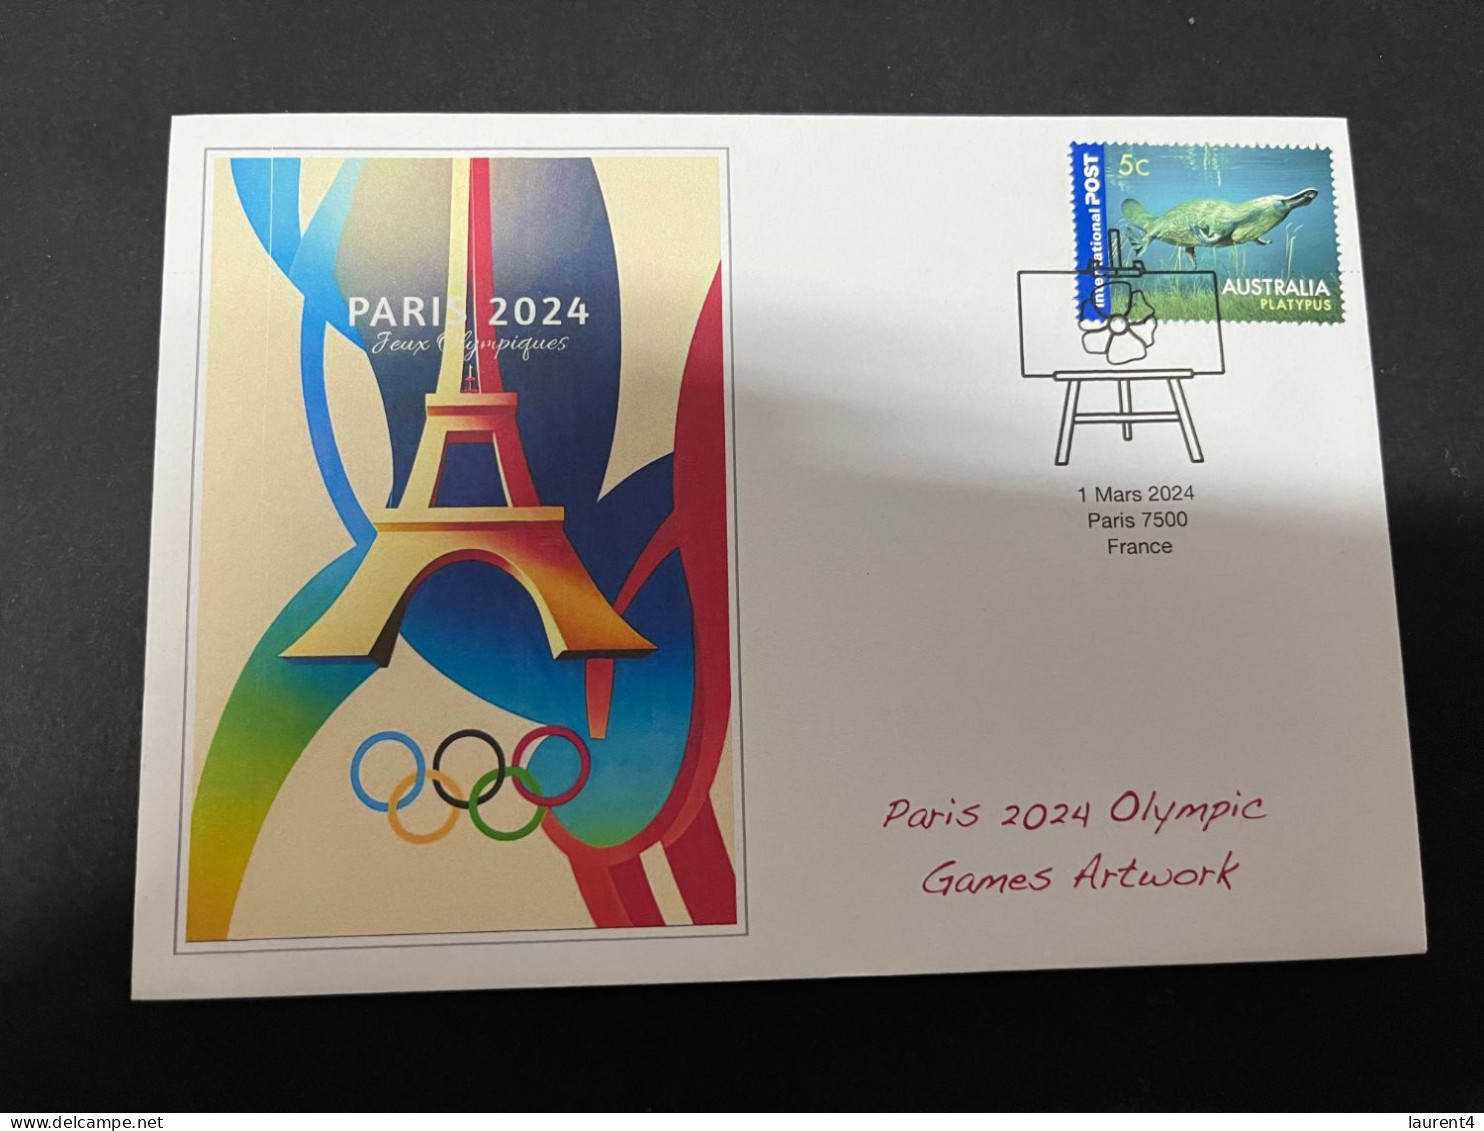 9-3-2024 (2 Y 33) Paris Olympic Games 2024 - 3 (of 12 Covers Series) For The Paris 2024 Olympic Games Artwork - Summer 2024: Paris